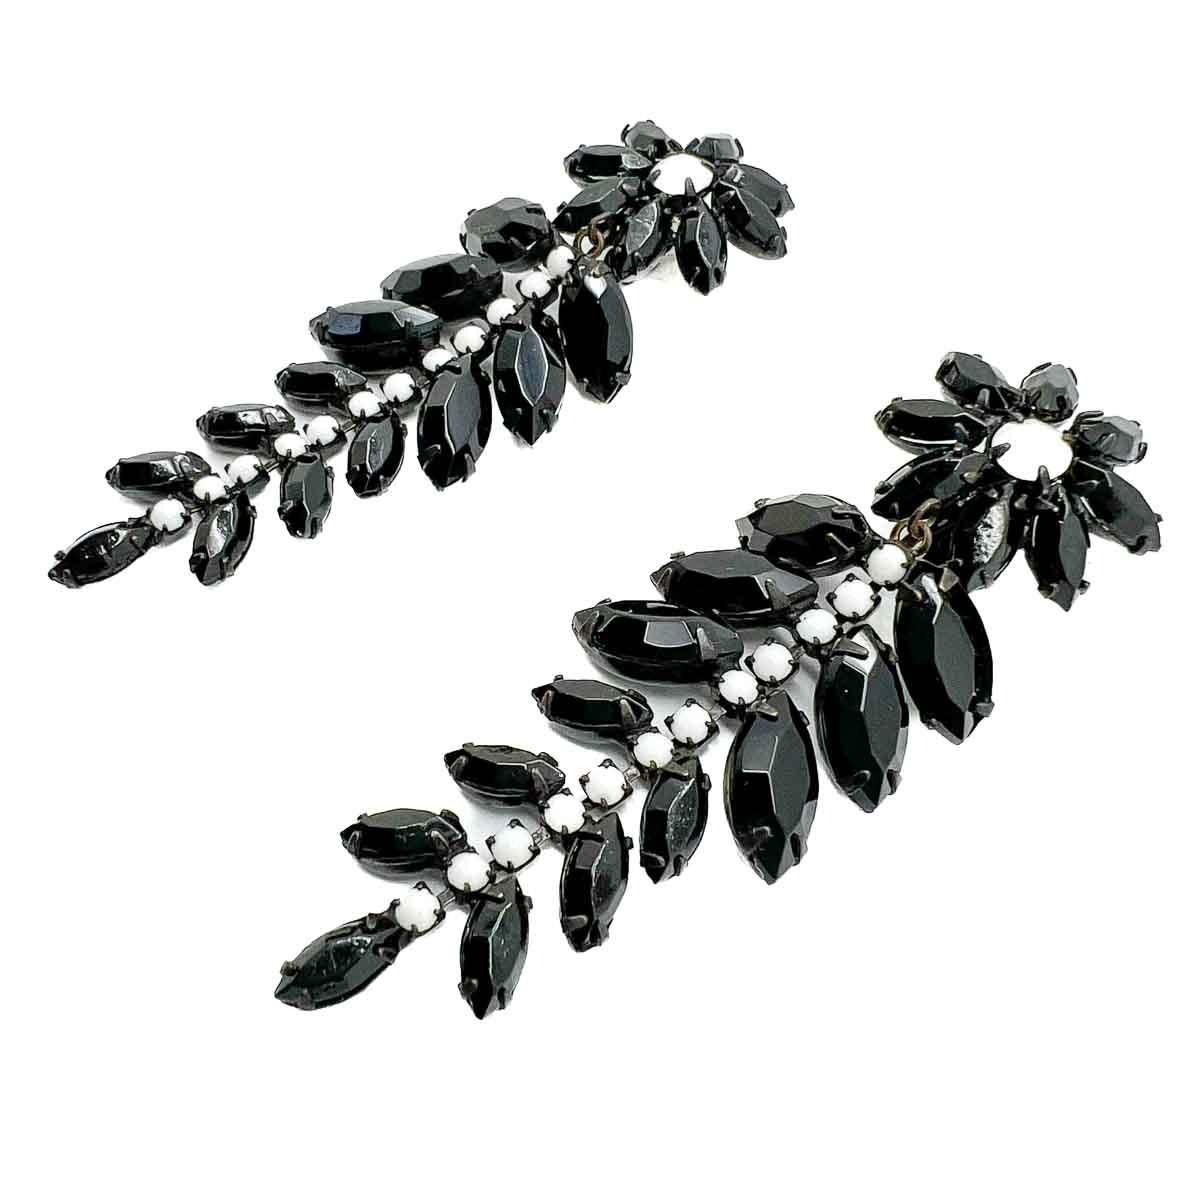 A pair of Vintage Hattie Carnegie Monochrome Drop Earrings. Timeless black and white fancy cut glass drops finished with a wonderfully chic floral motif. A fabulous find from the exquisite House of Hattie Carnegie.

When Hattie Carnegie left Austria